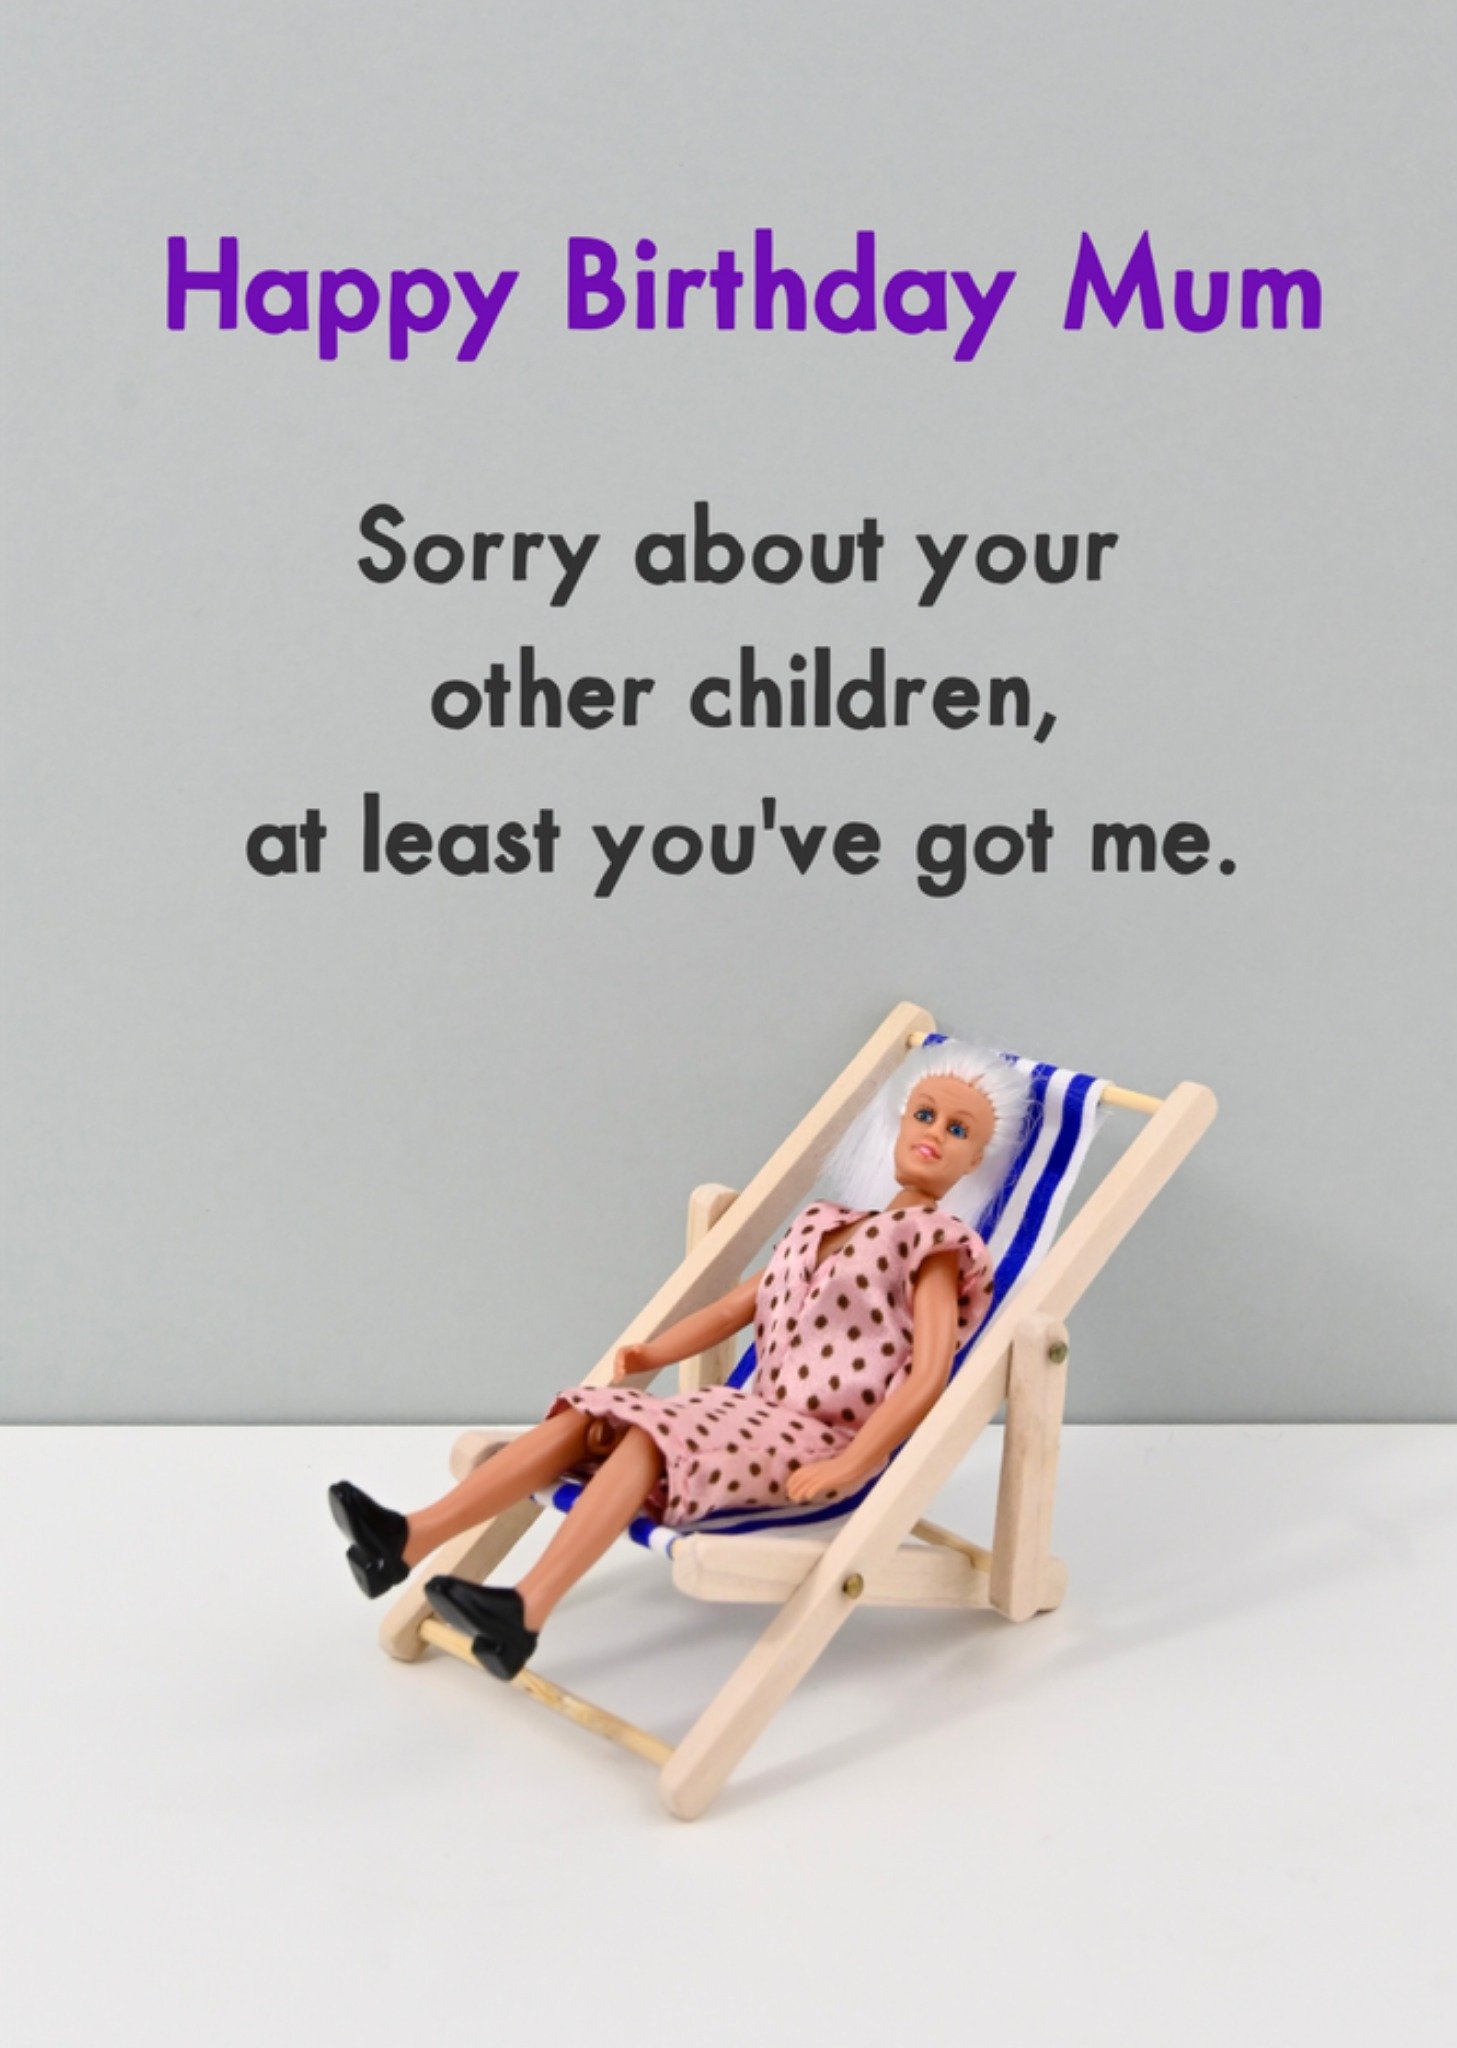 Moonpig Mum Sorry About Your Other Children At Least You've Got Me Deckchair Happy Birthday Card, La